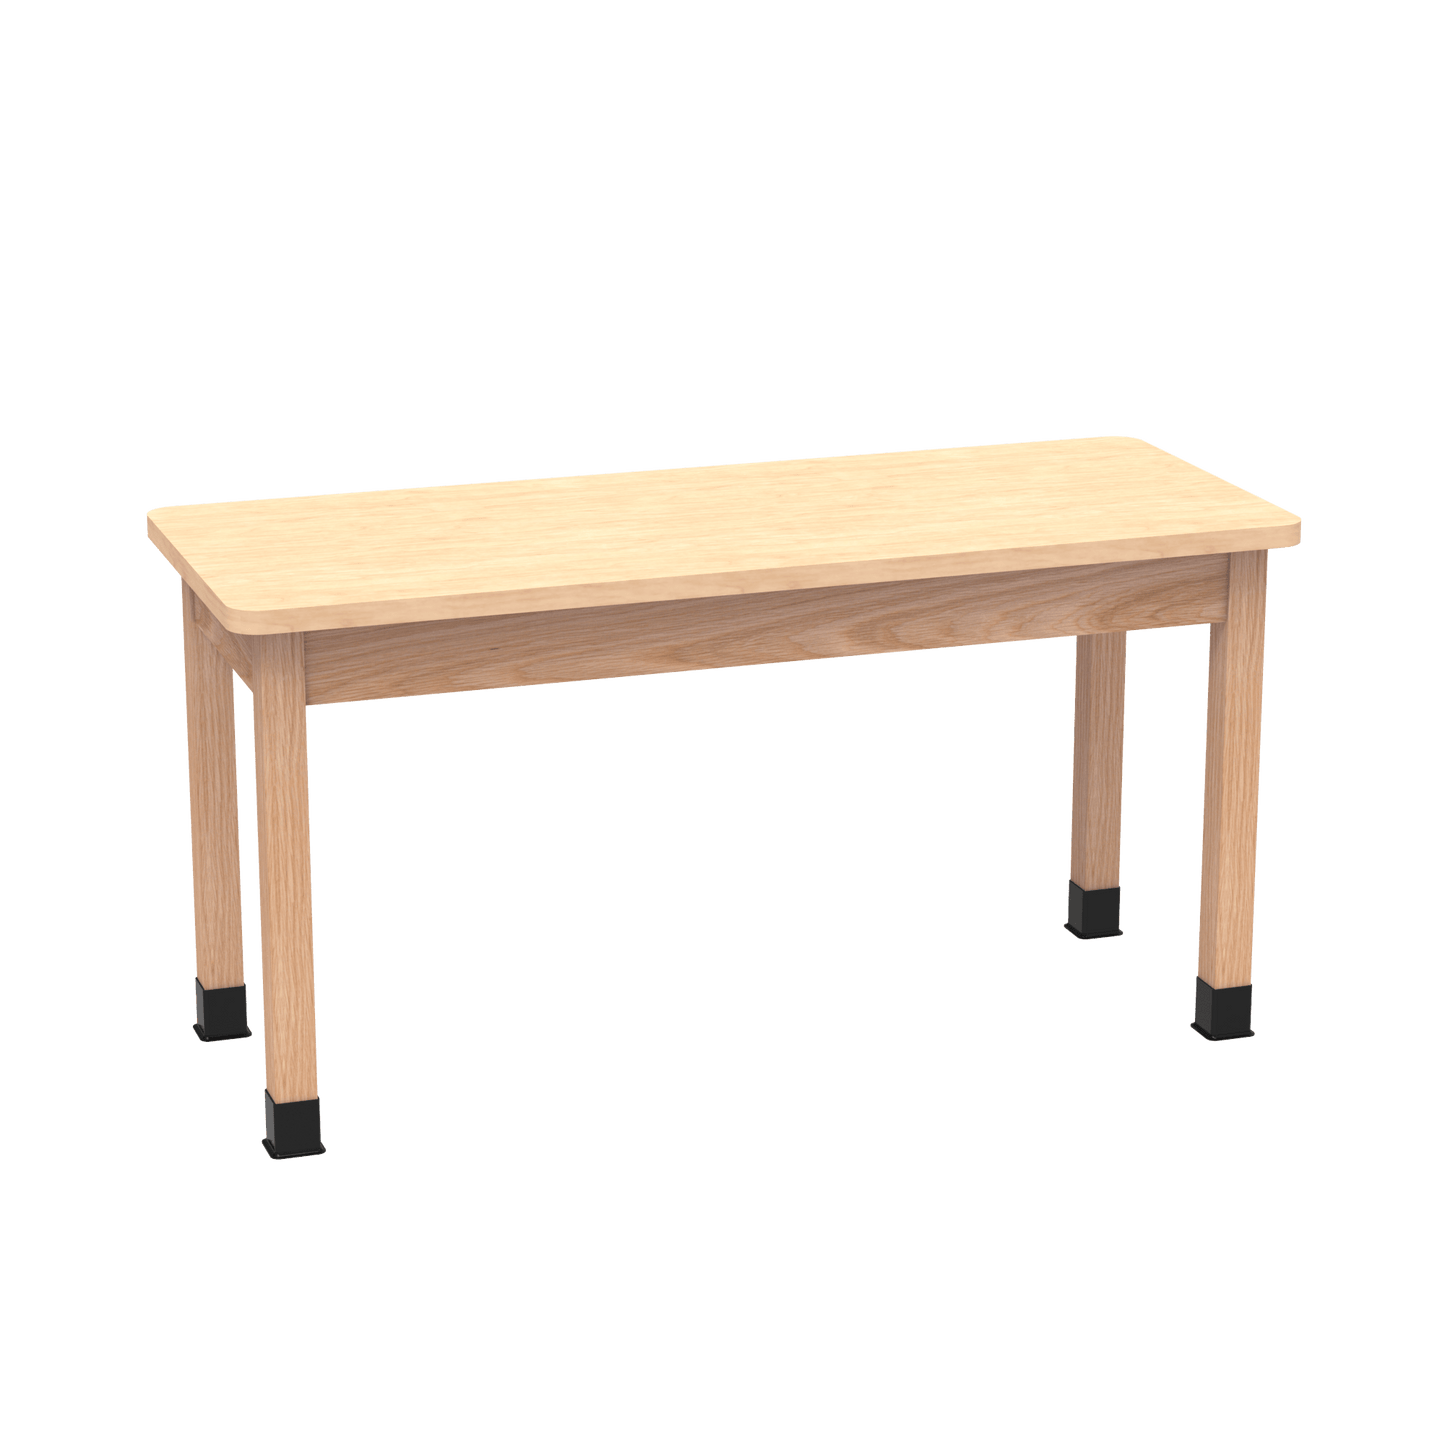 Diversified Woodcrafts Science Table - Plain Apron - 72" W x 42" D - Solid Wood Frame and Adjustable Glides - SchoolOutlet